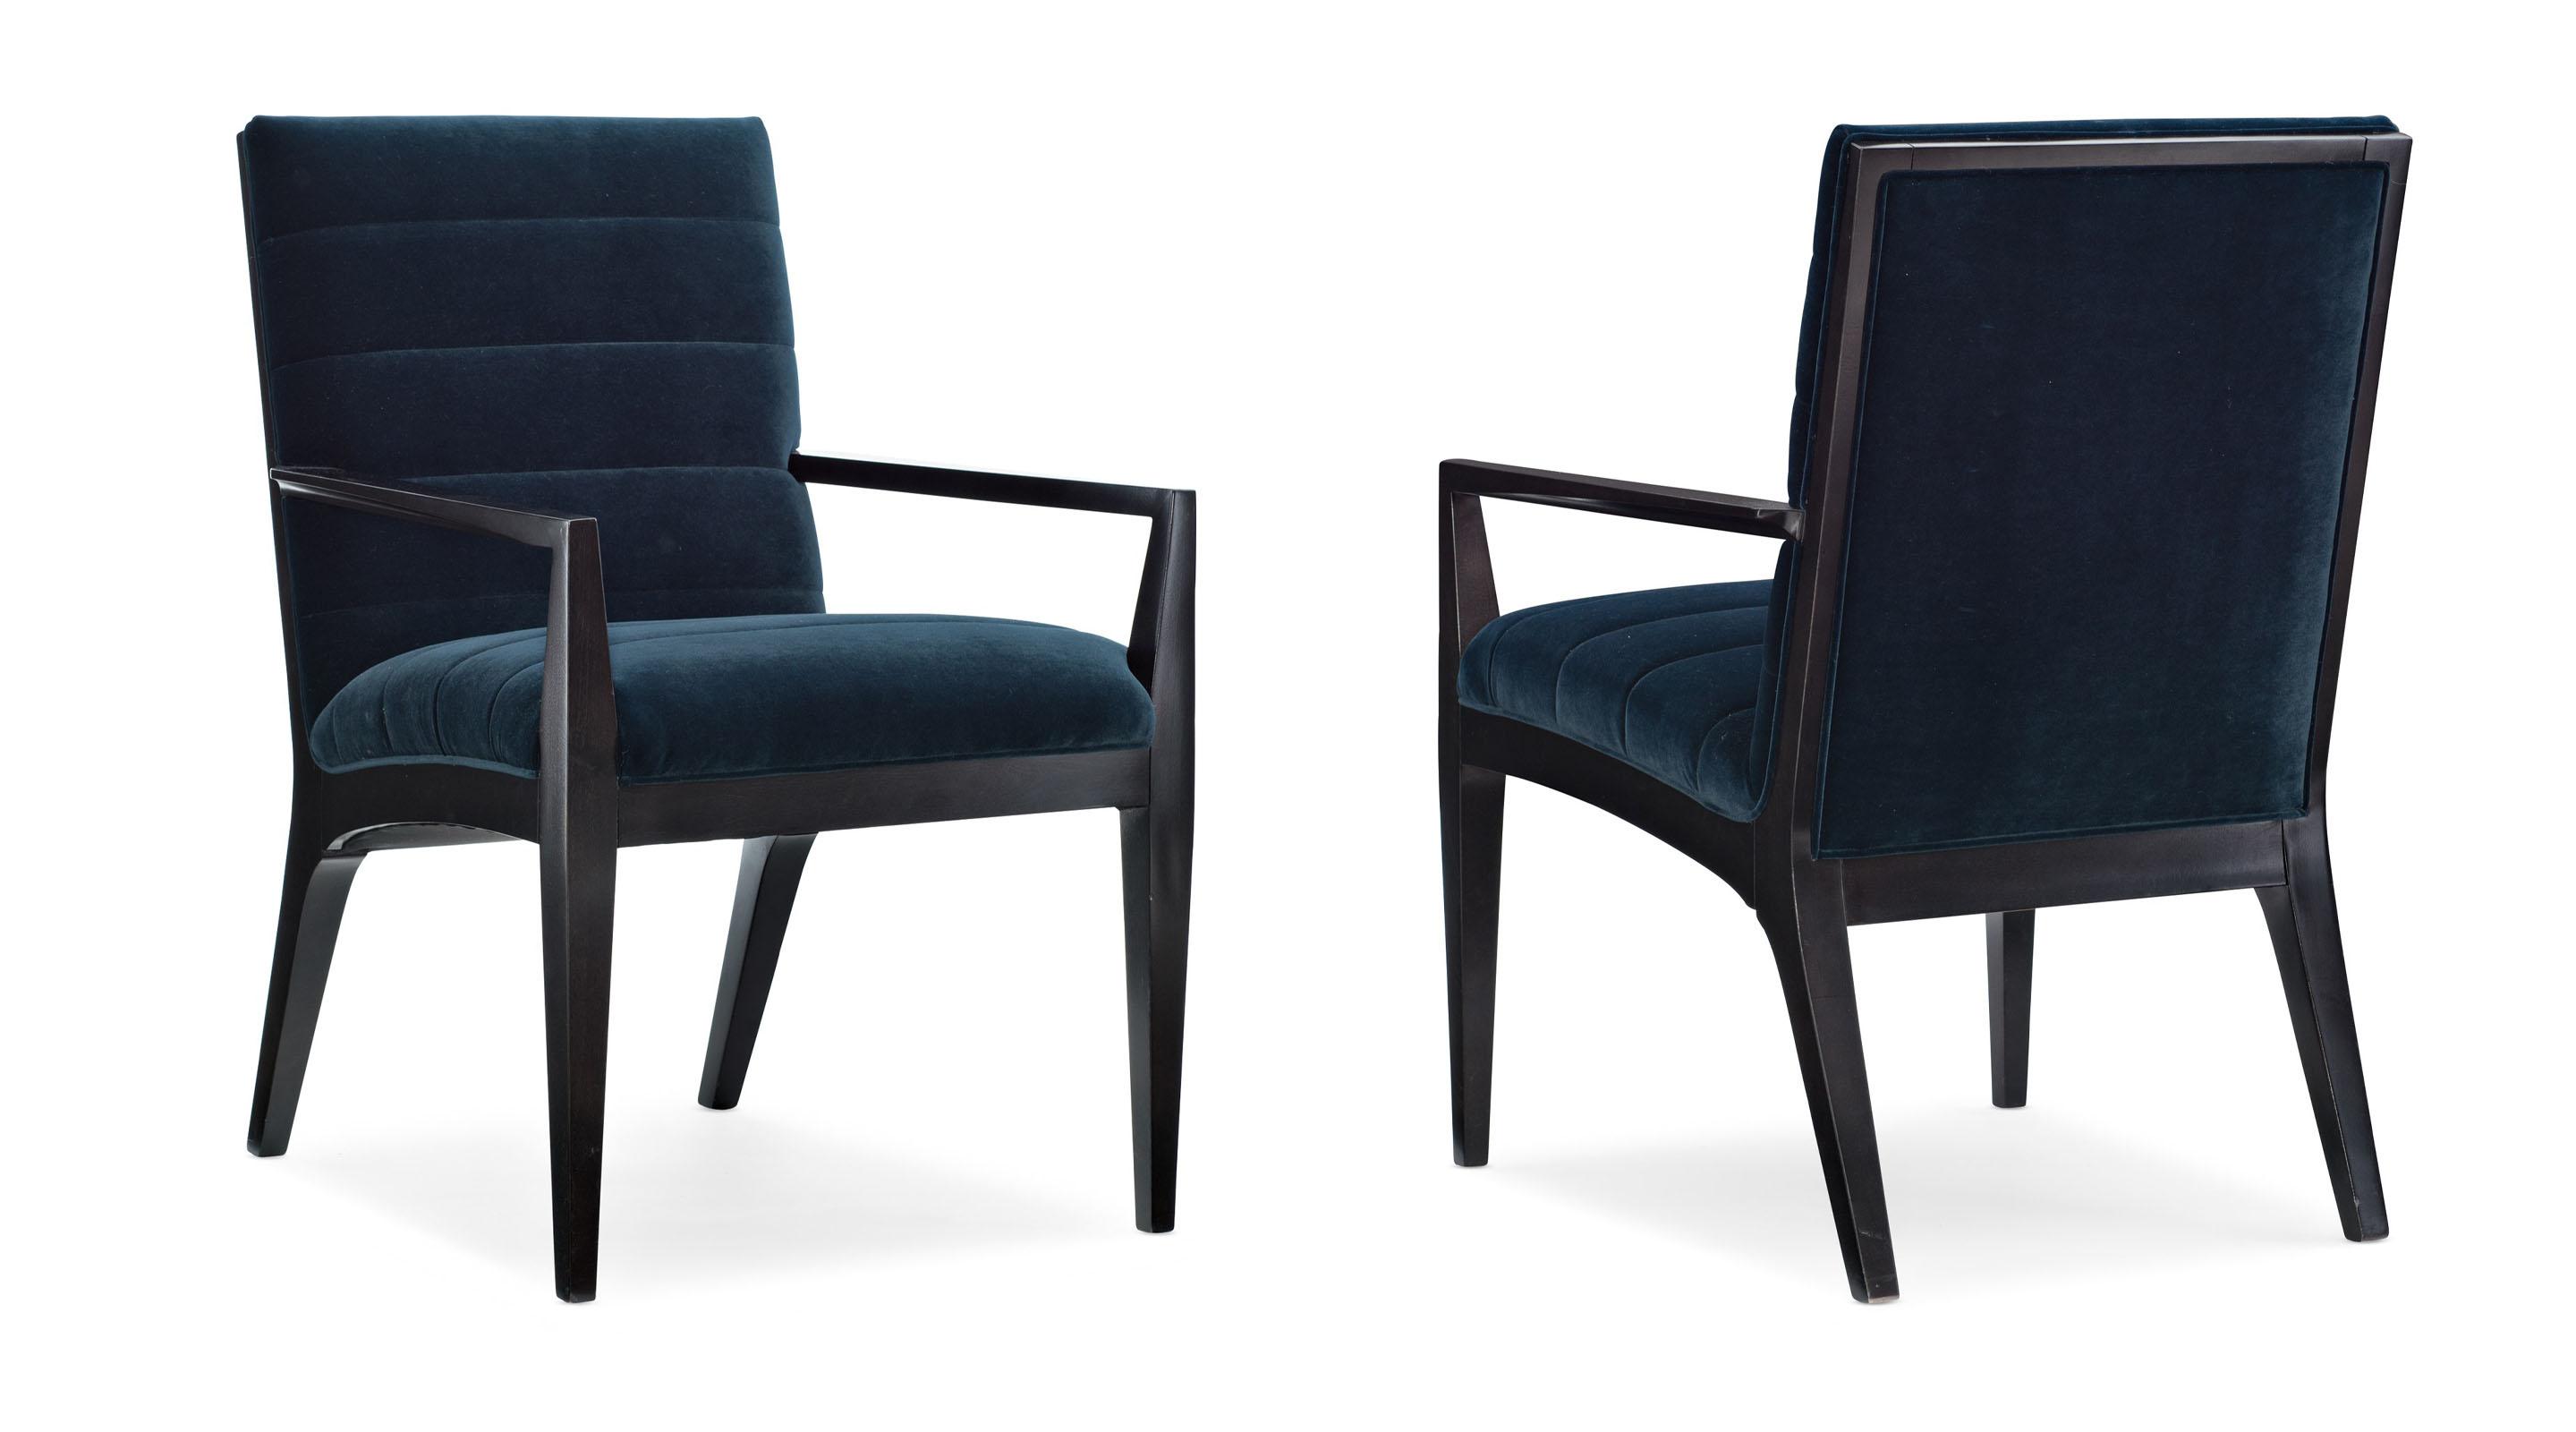 Contemporary Arm Chairs EDGE ARM CHAIR M102-419-271-Set-2 in Prussian blue, Black Fabric